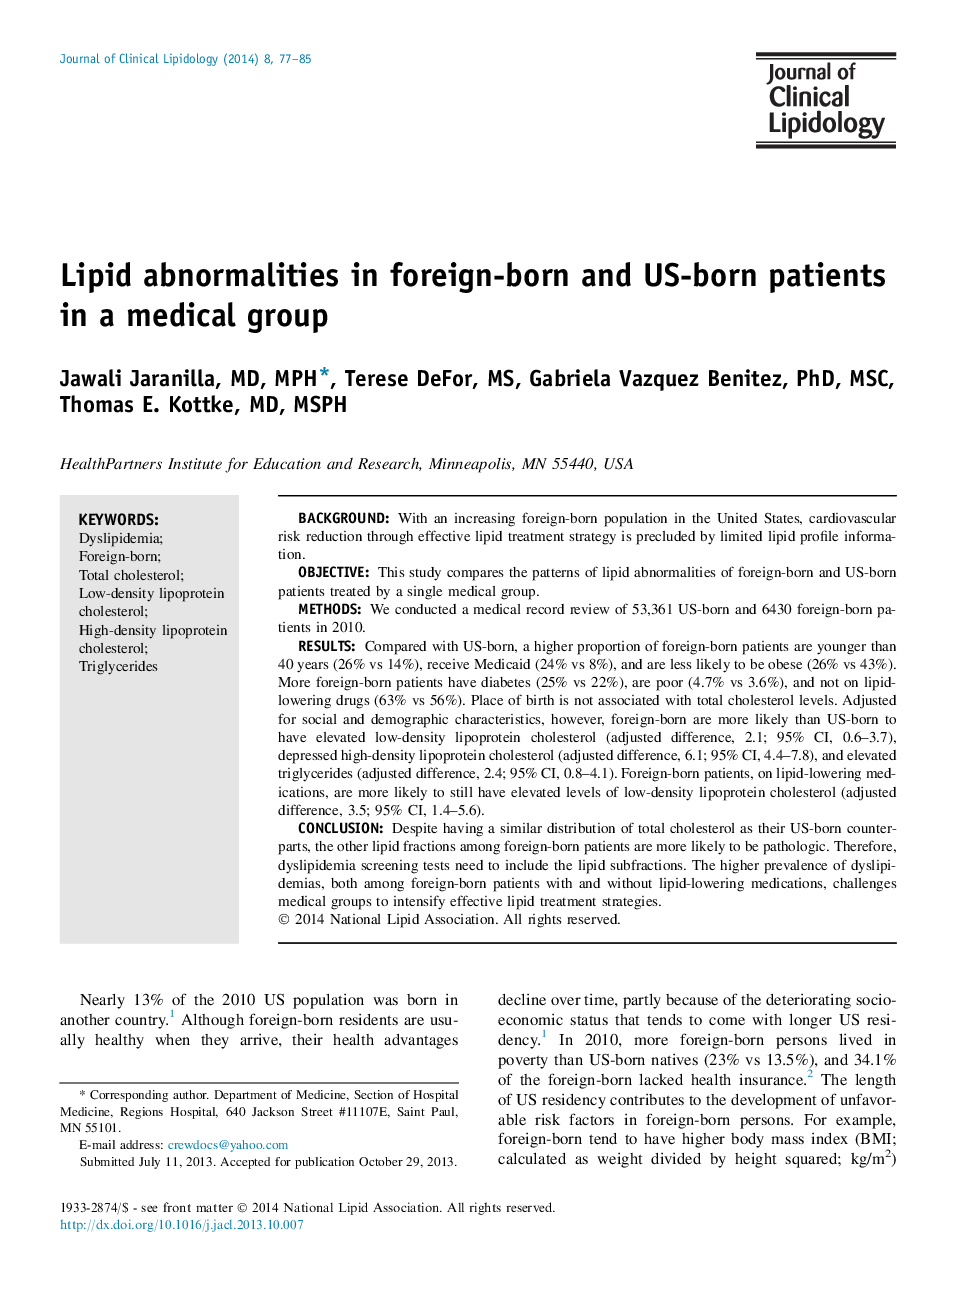 Lipid abnormalities in foreign-born and US-born patients in a medical group